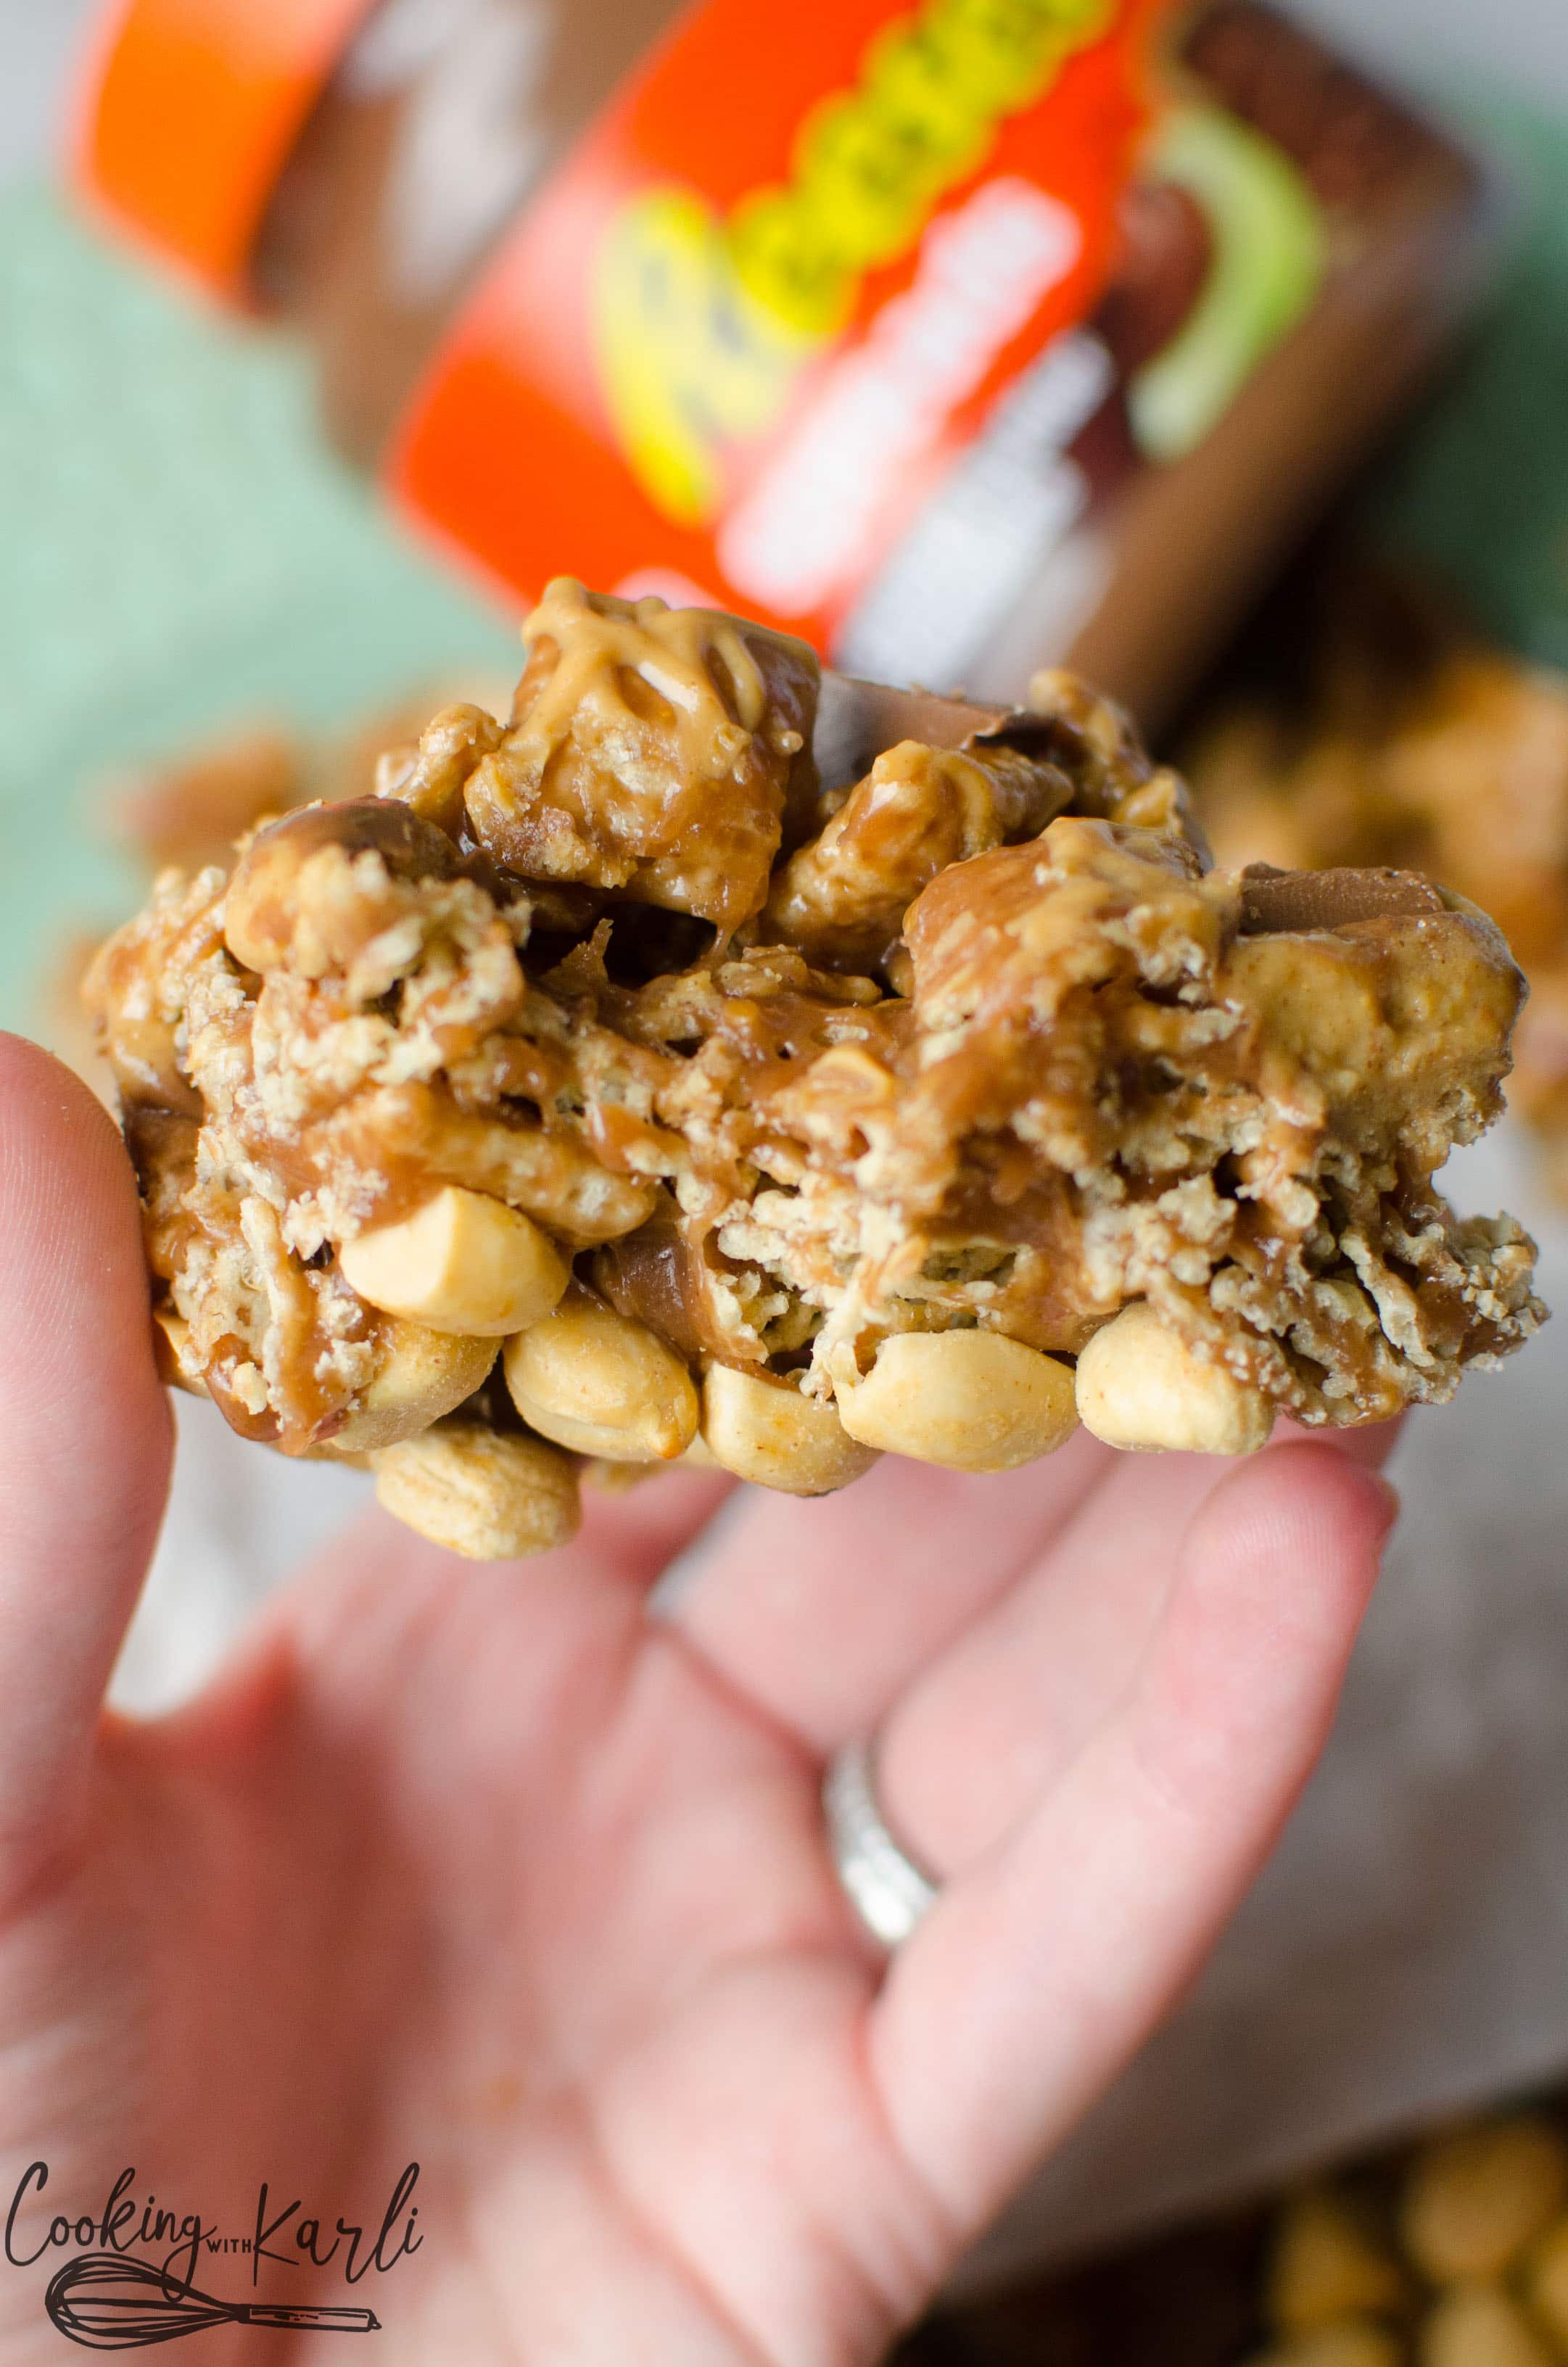 Reese's chocolate peanut butter spread used to make chex dessert bars.